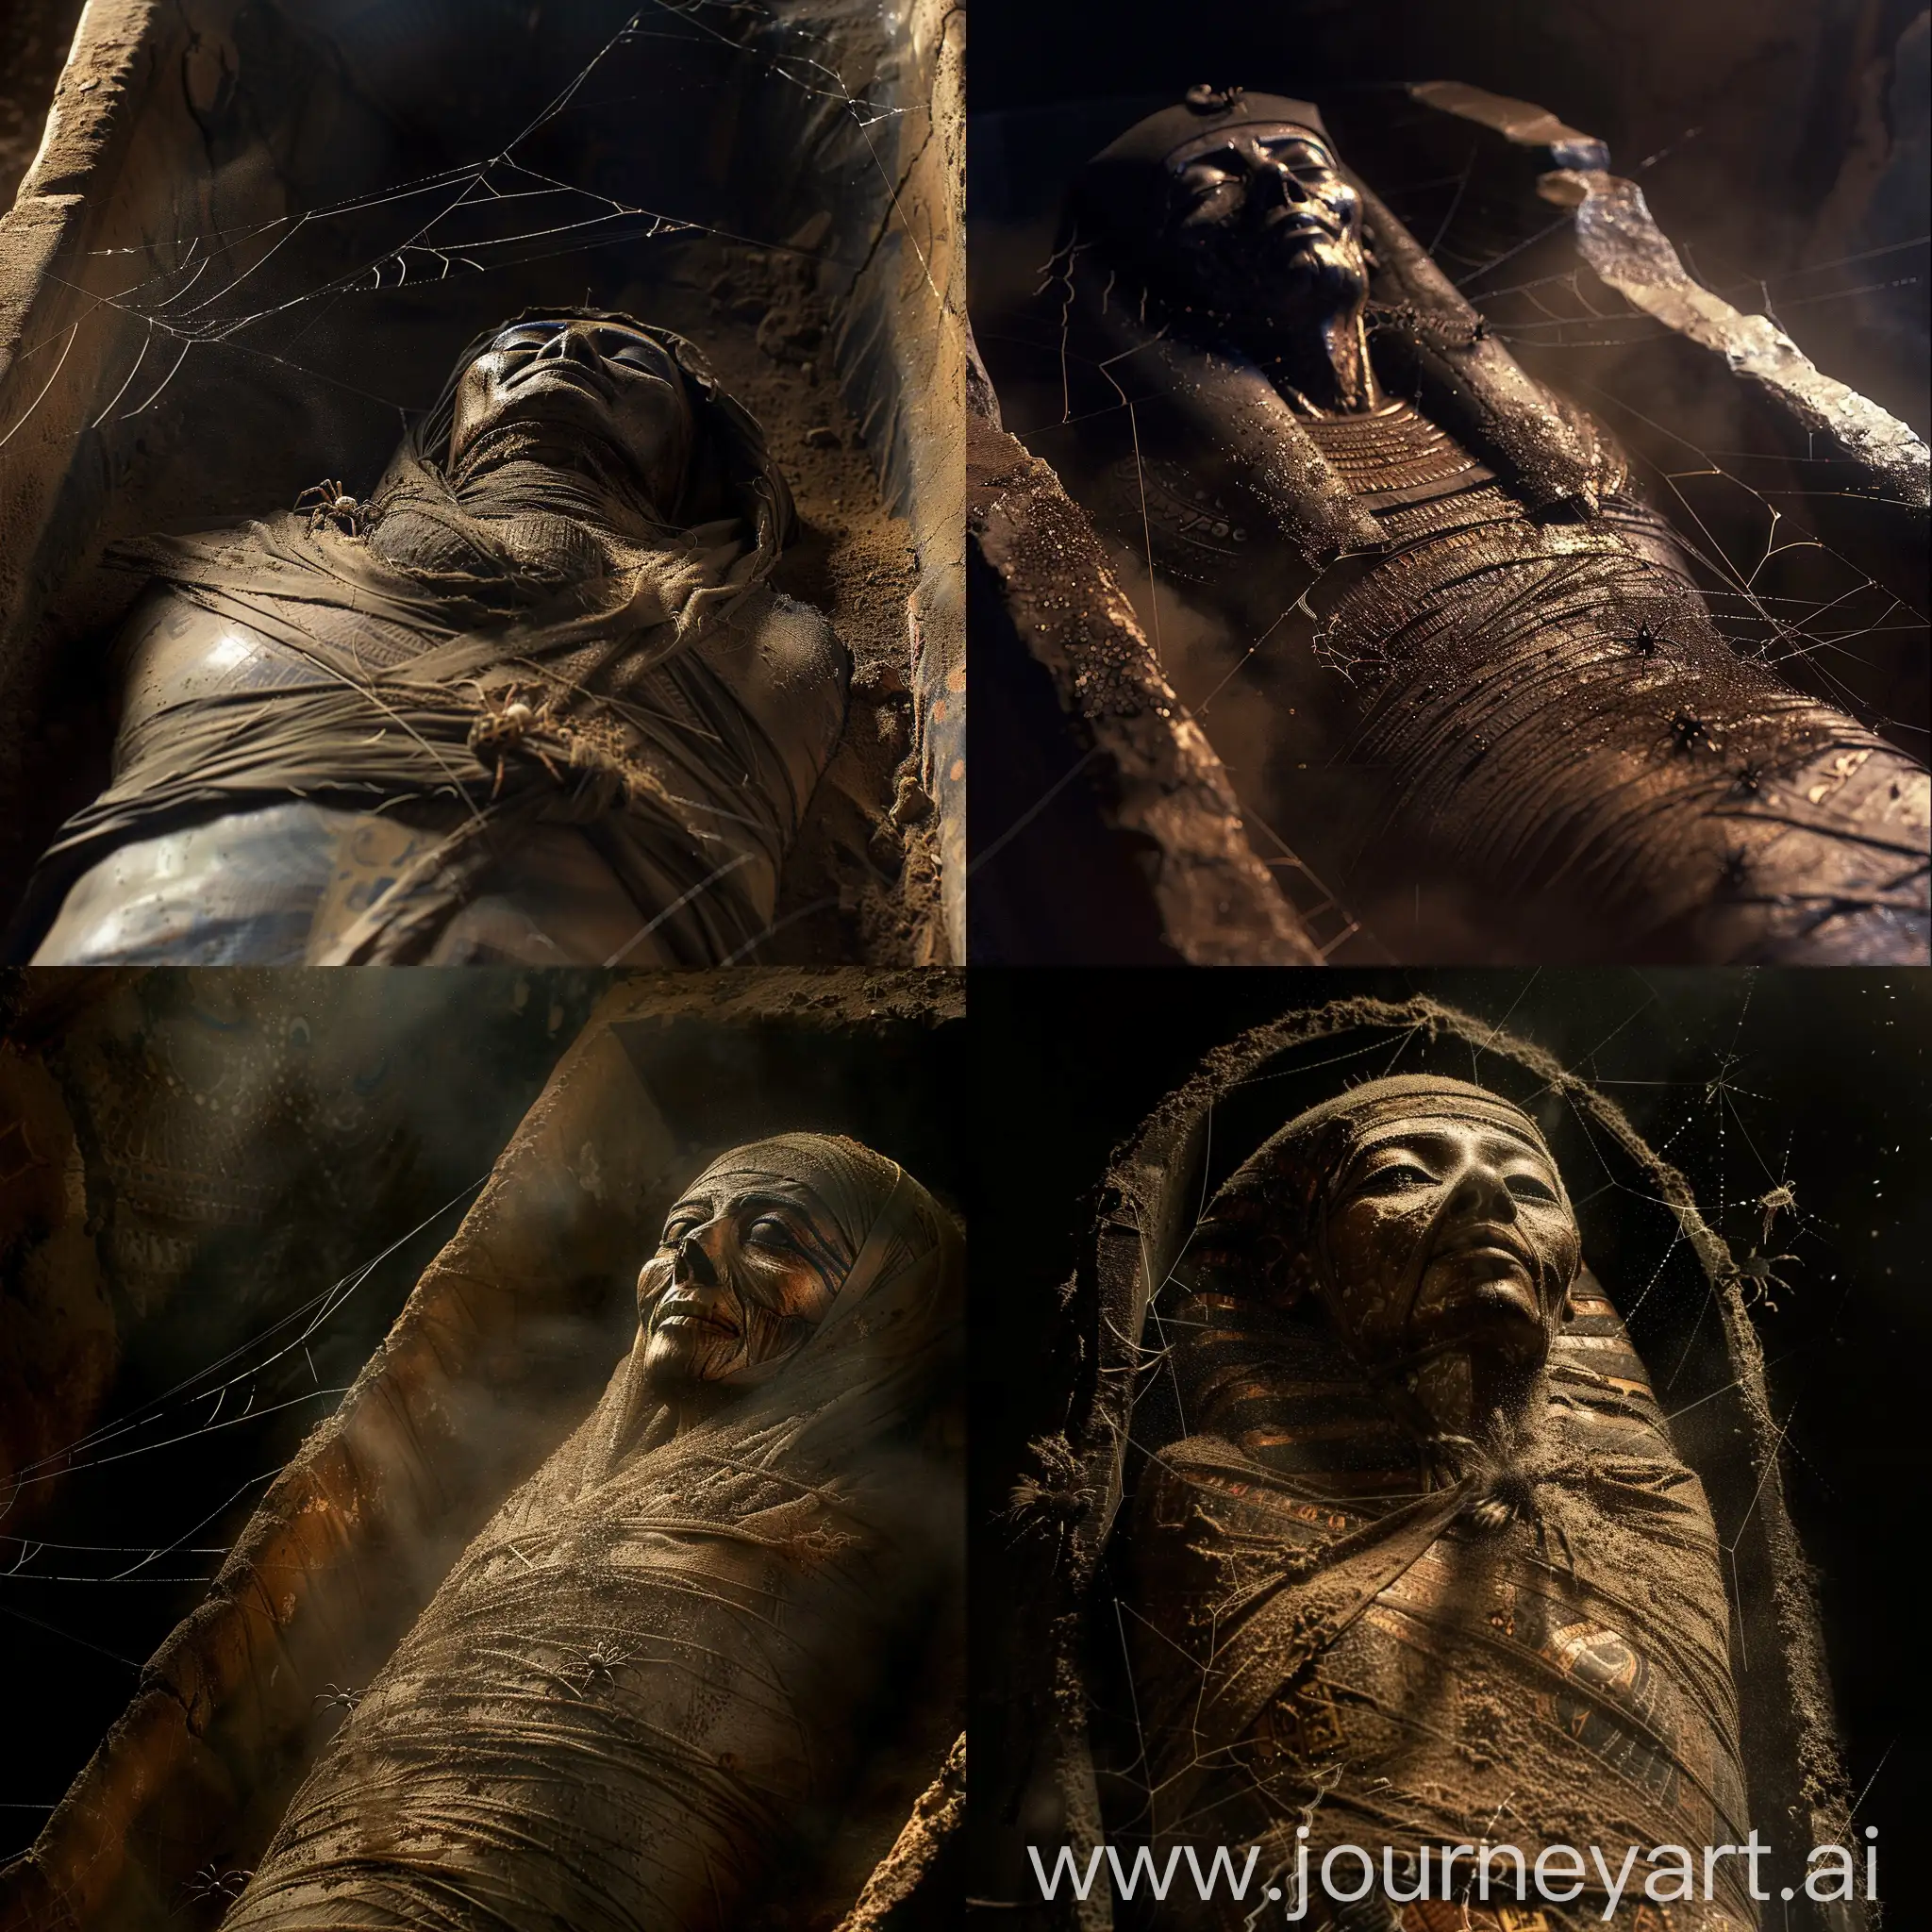 Ancient-Egyptian-Cursed-Soul-Mummy-Resting-in-Coffin-with-Wrath-and-Spider-Web